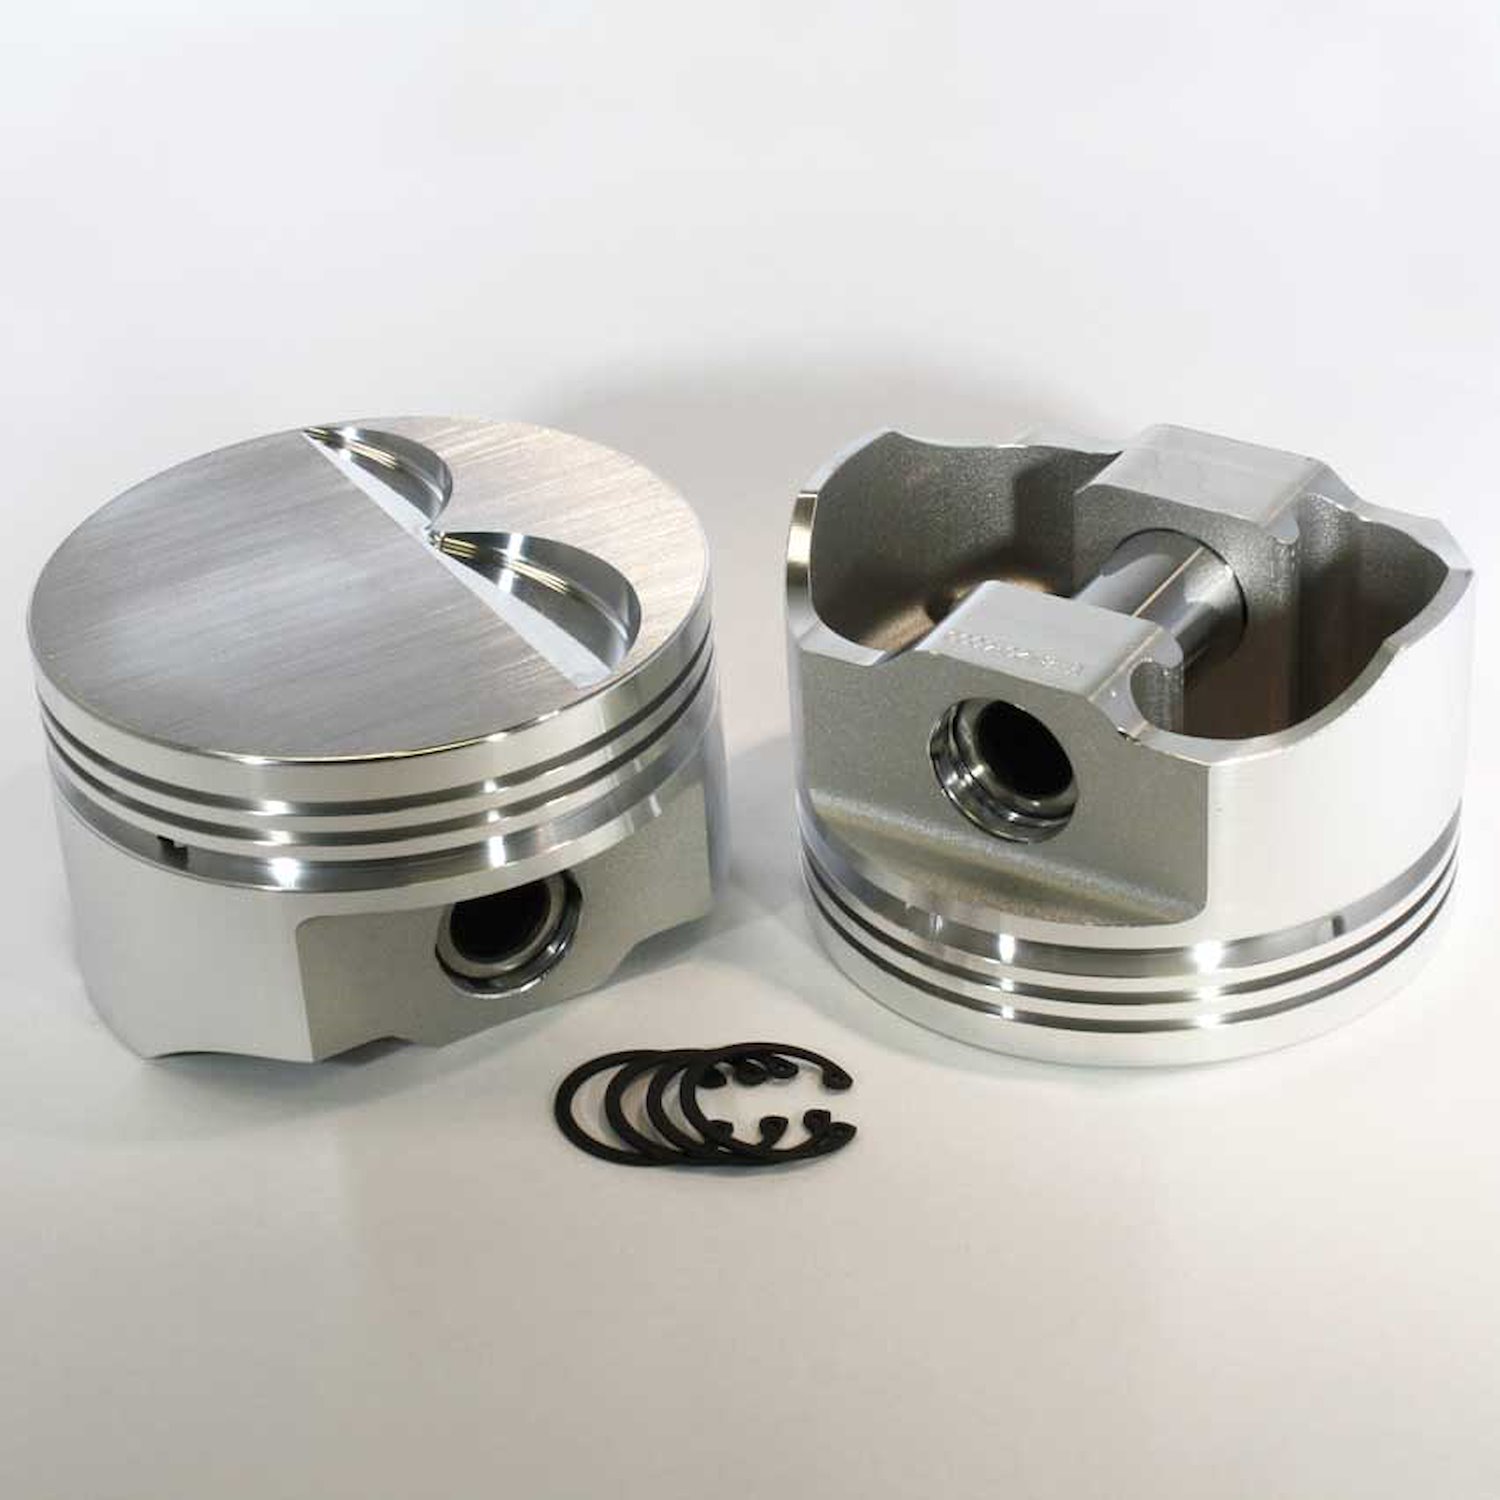 8770-3820 E-Series Flat Top Piston Set for 1997-2005 Chevy LS, 3.820 in. Bore, -3cc Volume [OEM Stroke]